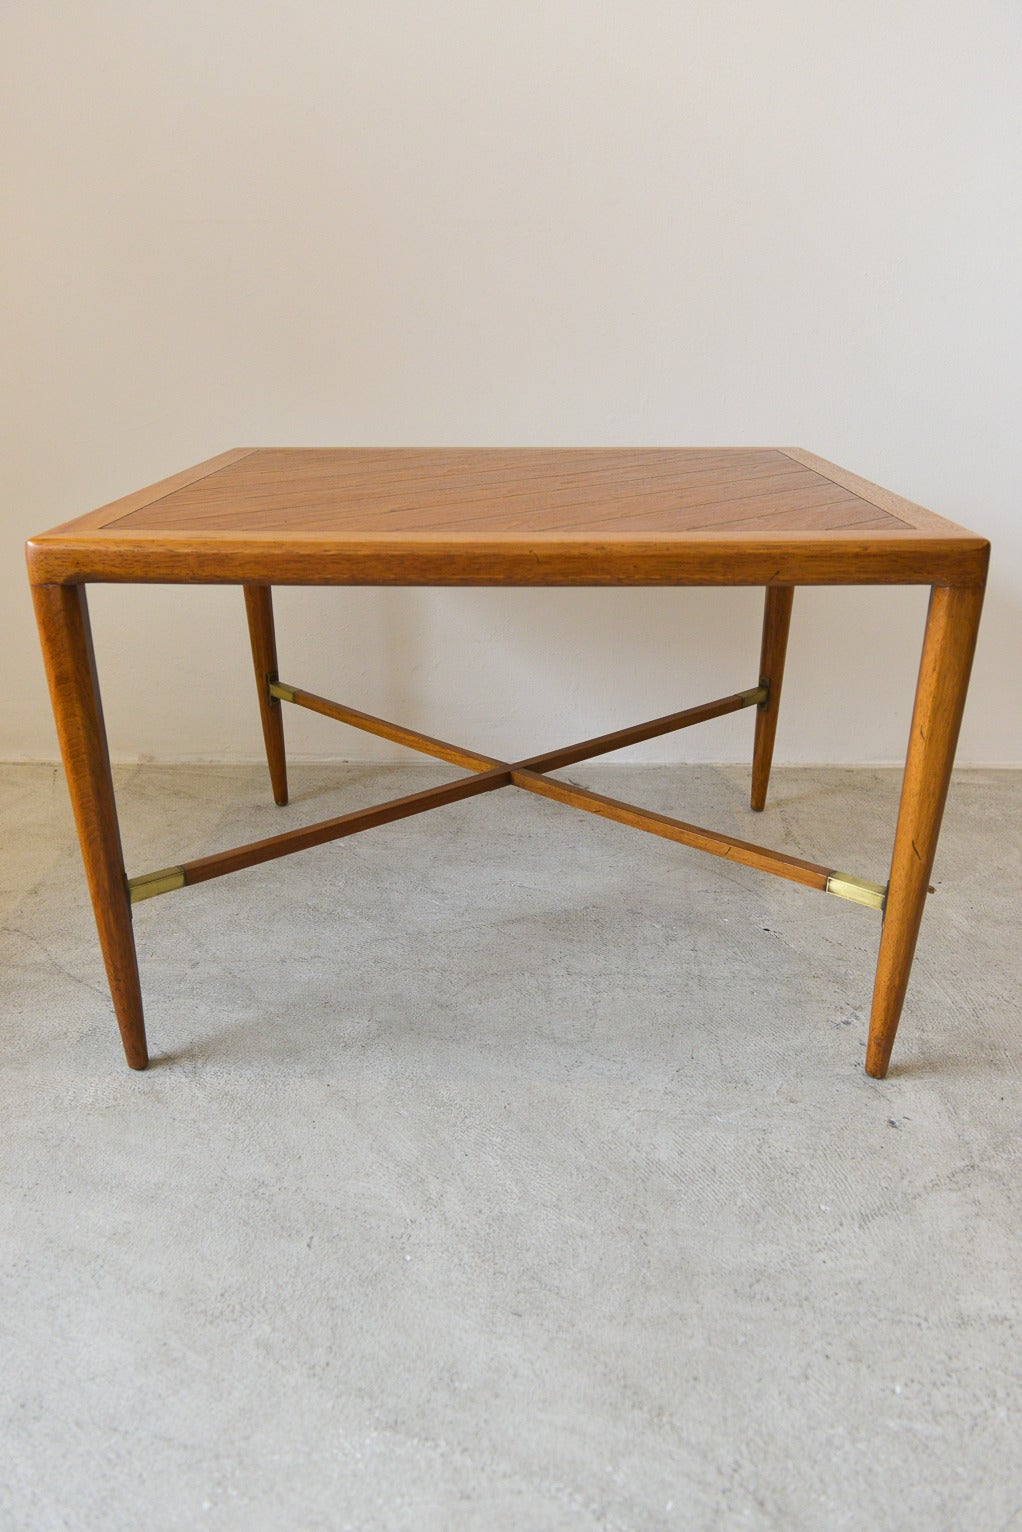 Beautiful mahogany and brass x-base side or end table from the ‘Sophisticate’ line by Tomlinson.  Classic and timeless x-base design with great brass detail on the joints of the crossbars.  Lovely bias cut wood inlay on the top.  Excellent vintage